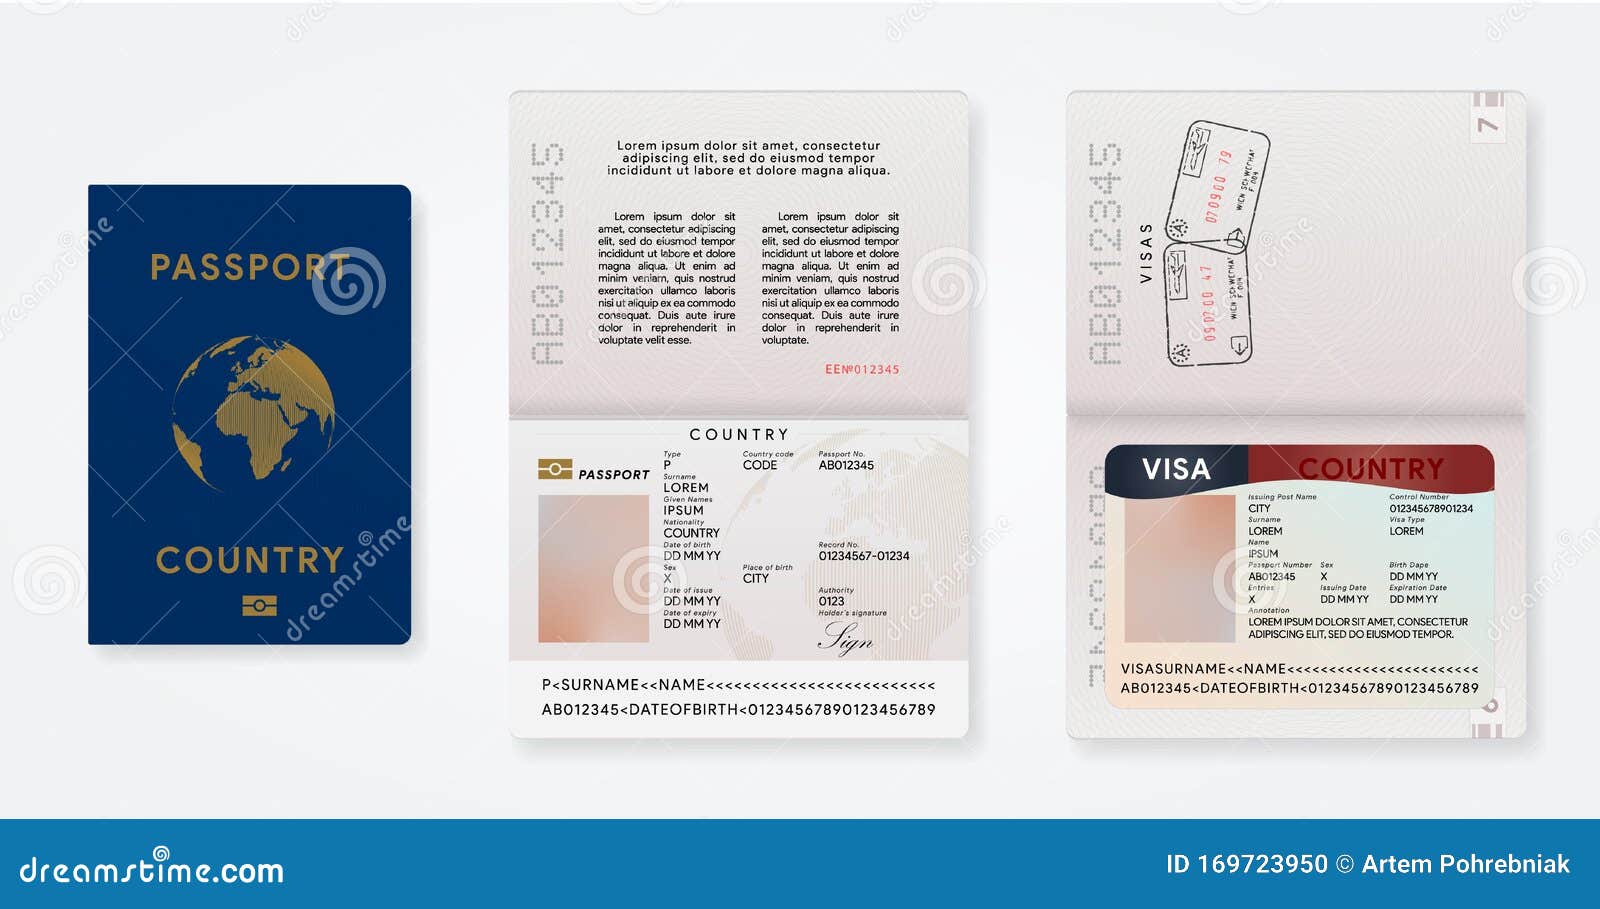 biometric passport template. travel id card mockup with tourist visa. international pass. departure and arrival airport stamp in